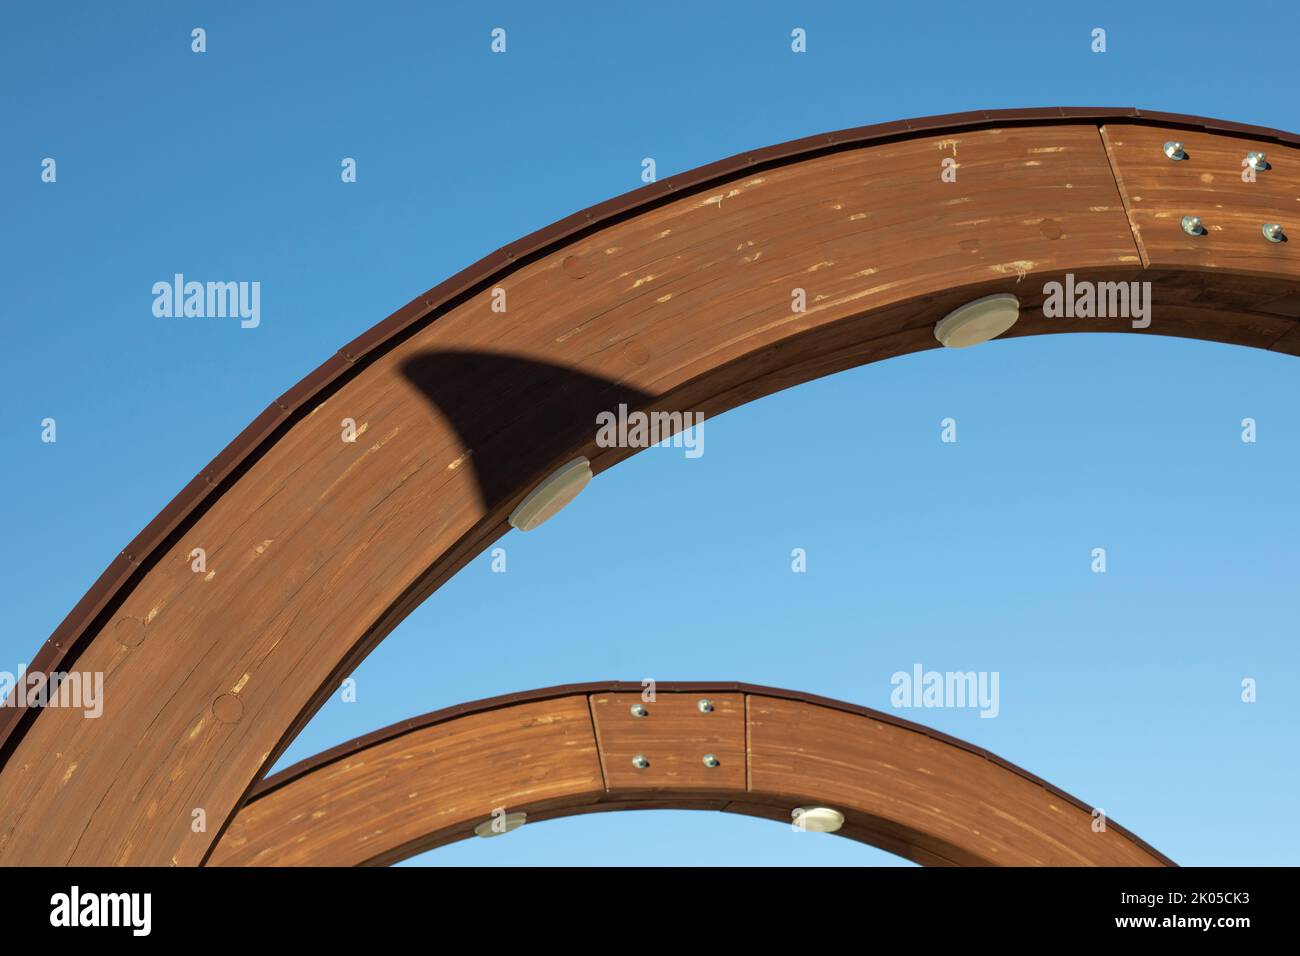 Wooden arch against sky. Architecture details. Support structure. Arc in building. Stock Photo